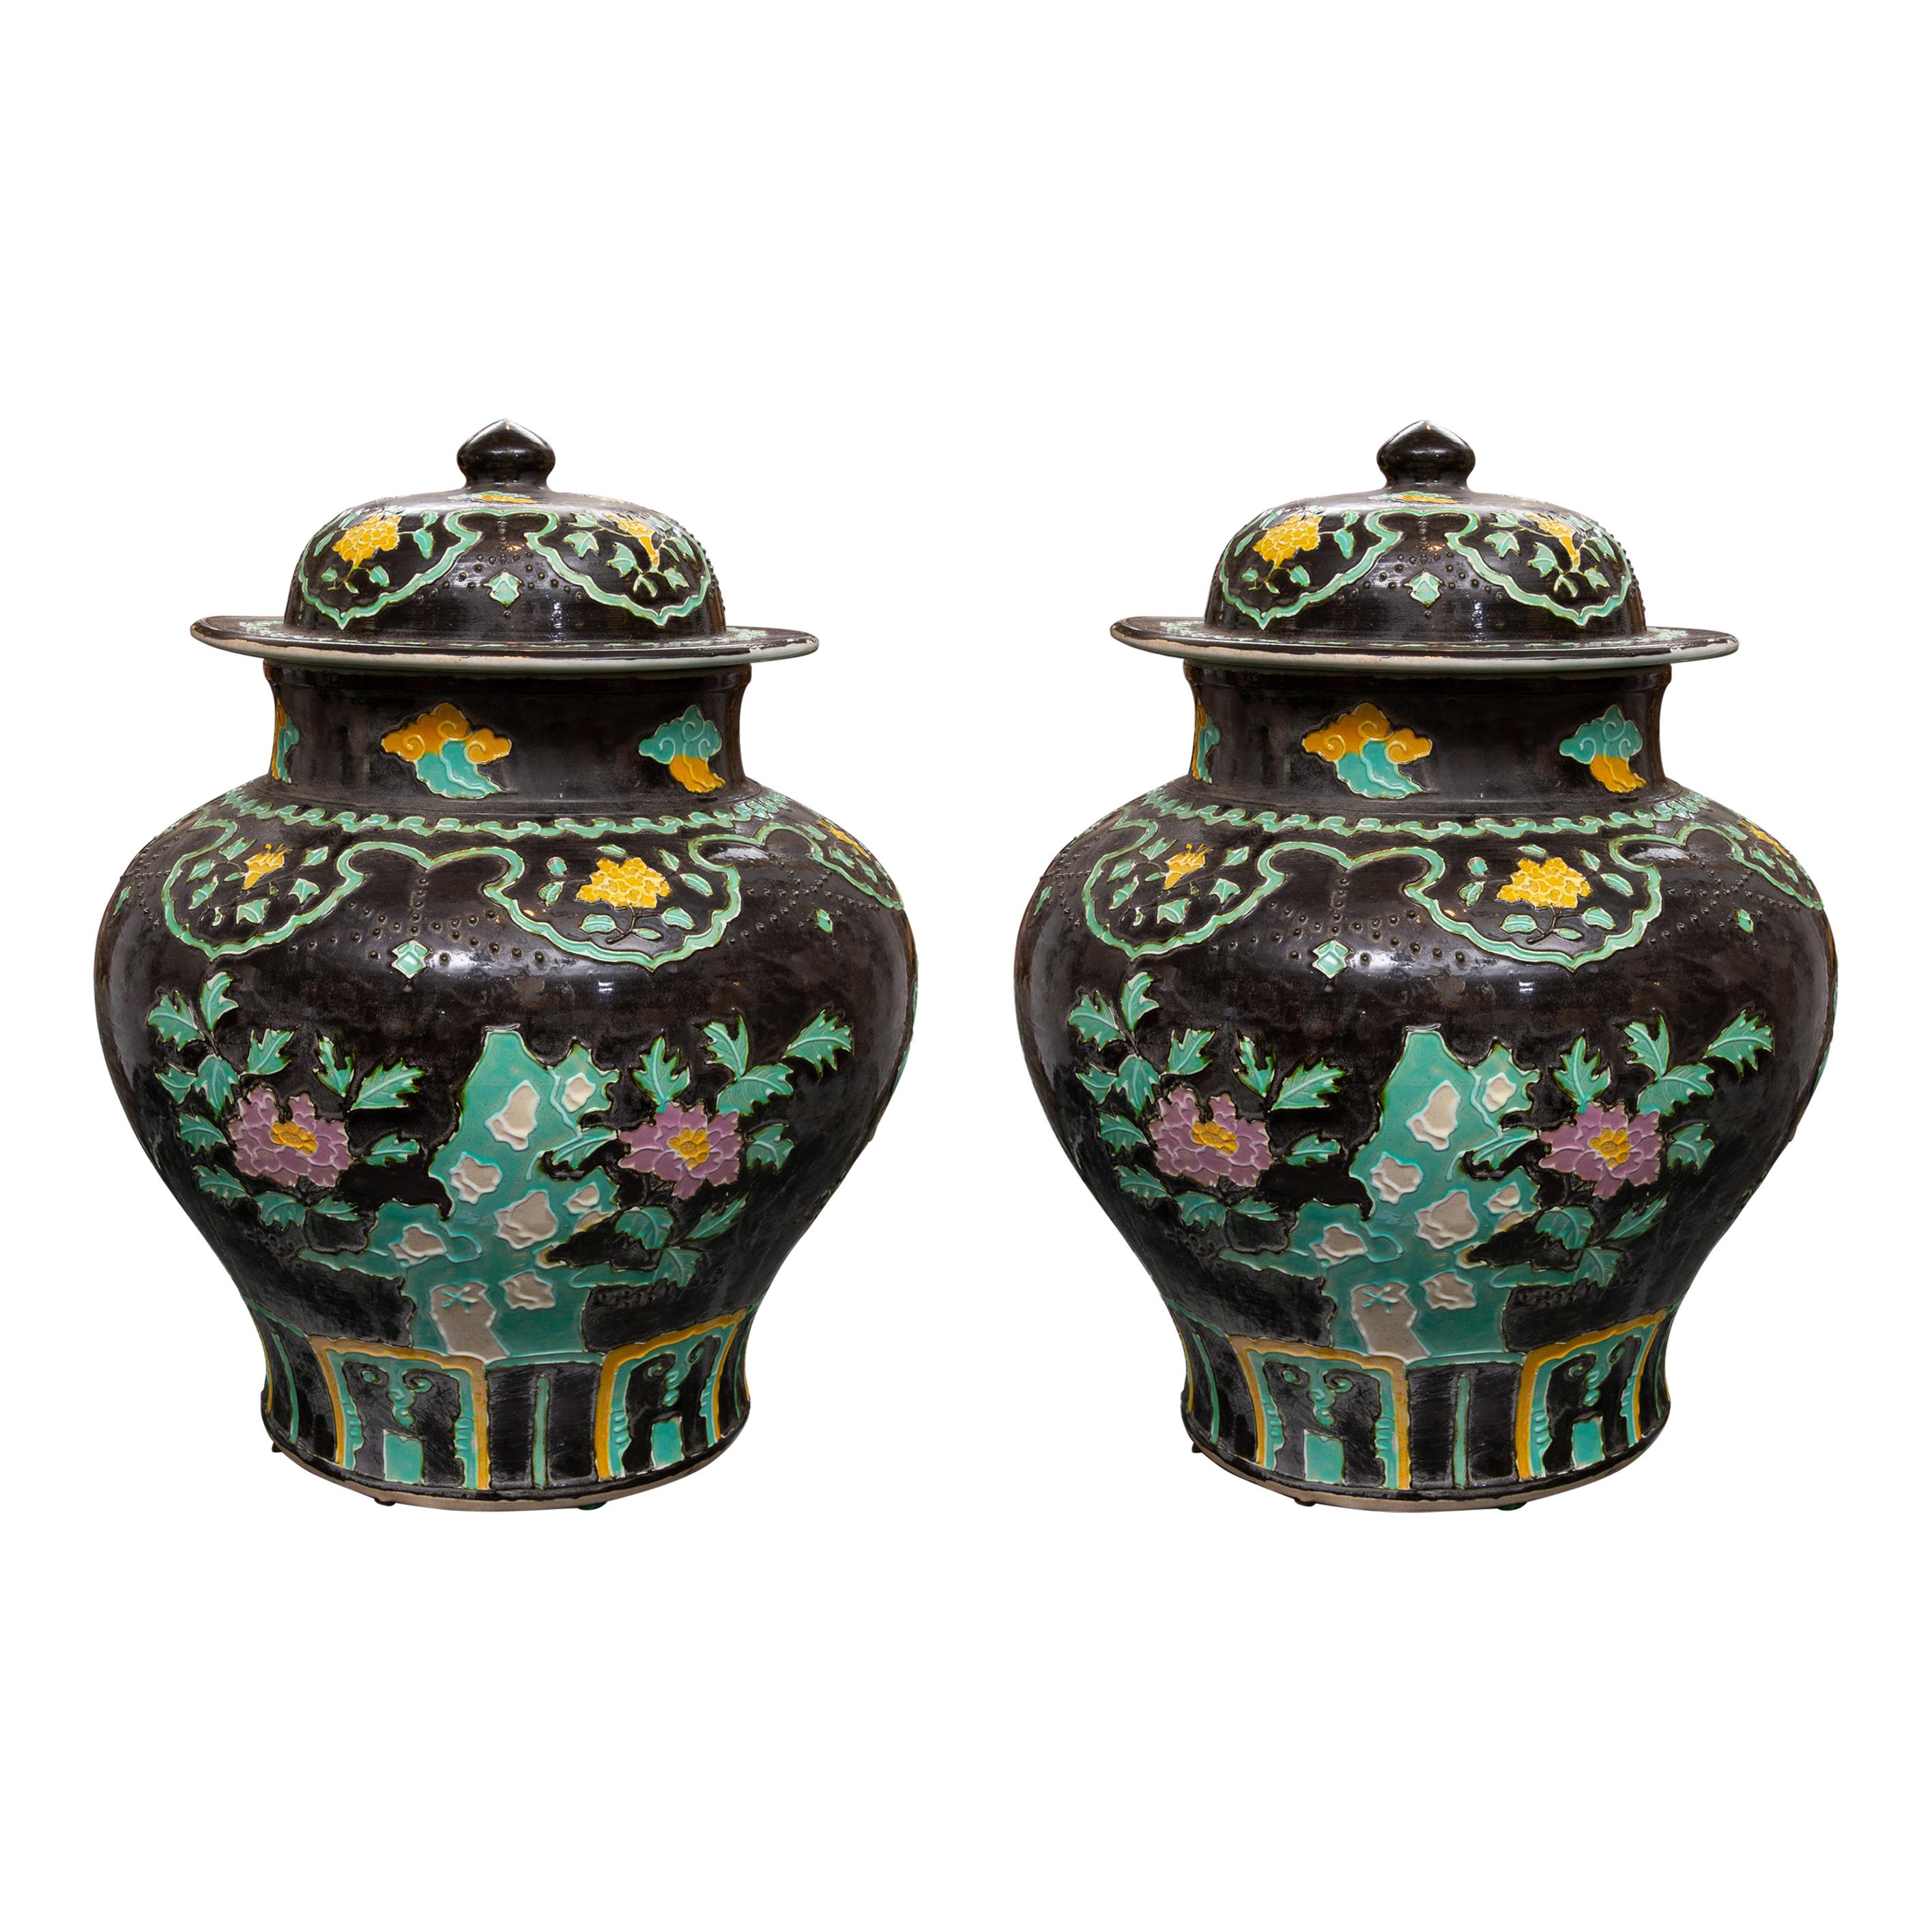 Pair of Large Fahua Pottery Covered Jars